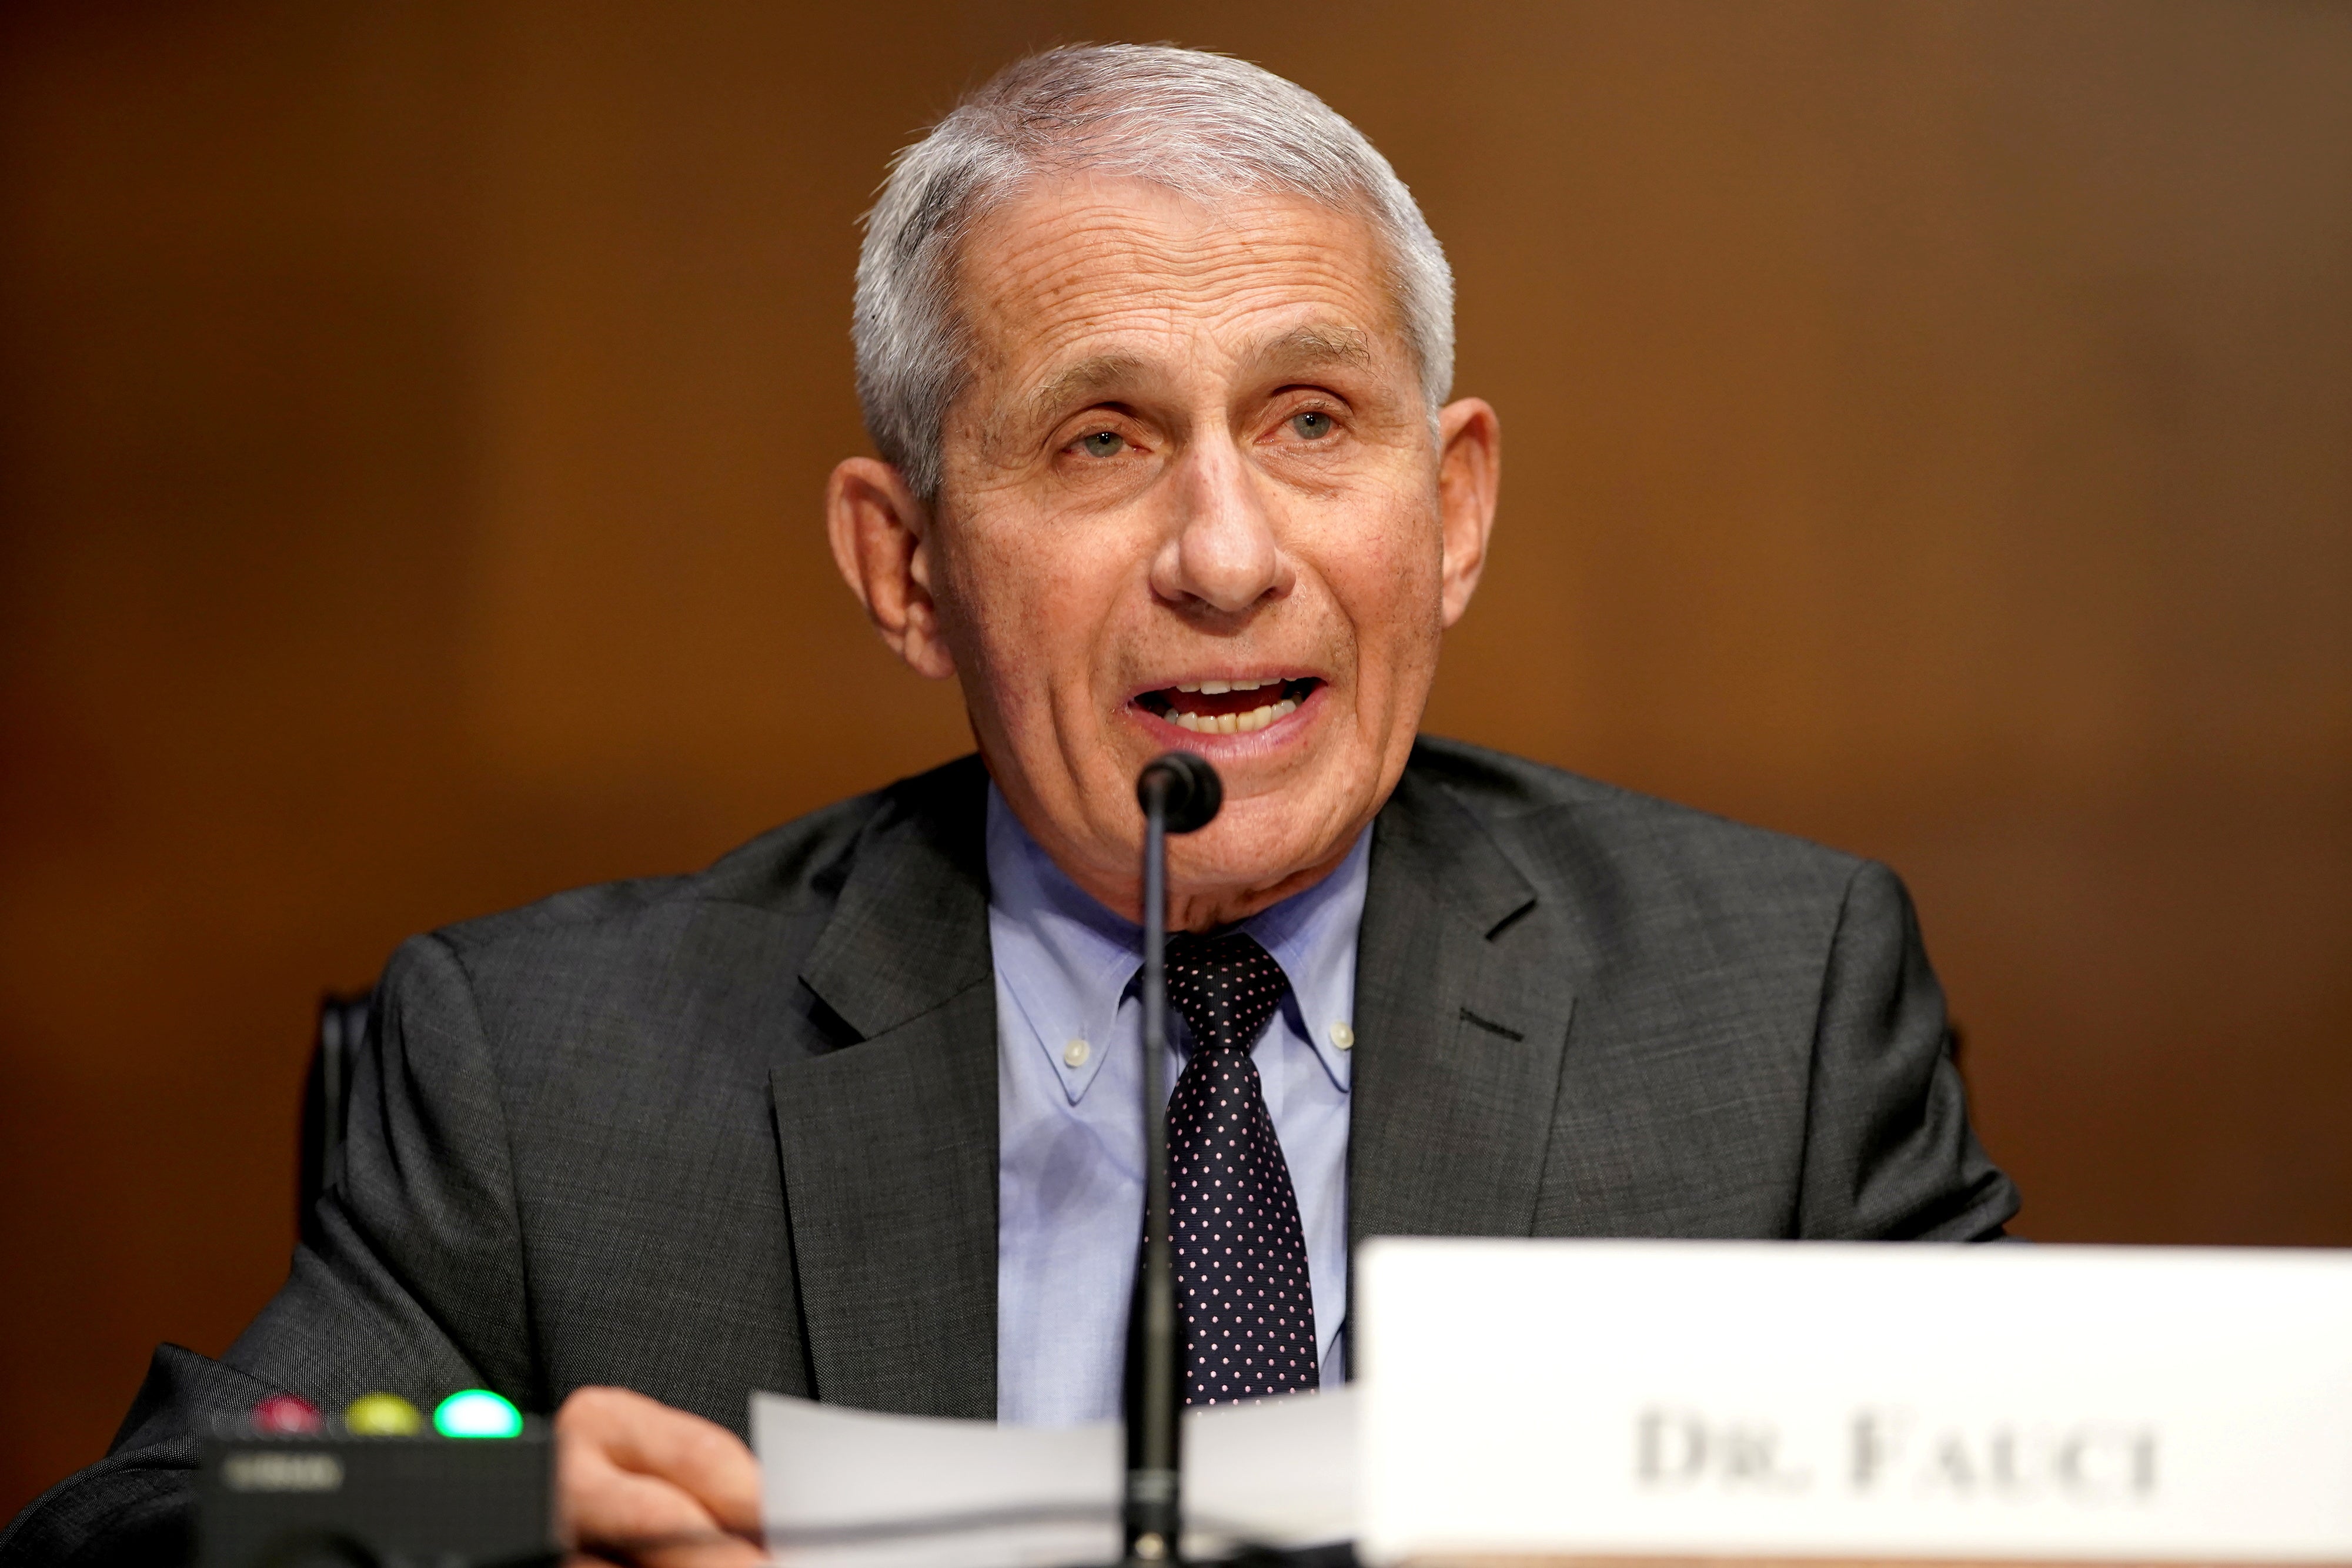 Dr Anthony Fauci, director of the National Institute of Allergy and Infectious Diseases, said racism has led to unacceptable health disparities amid pandemic